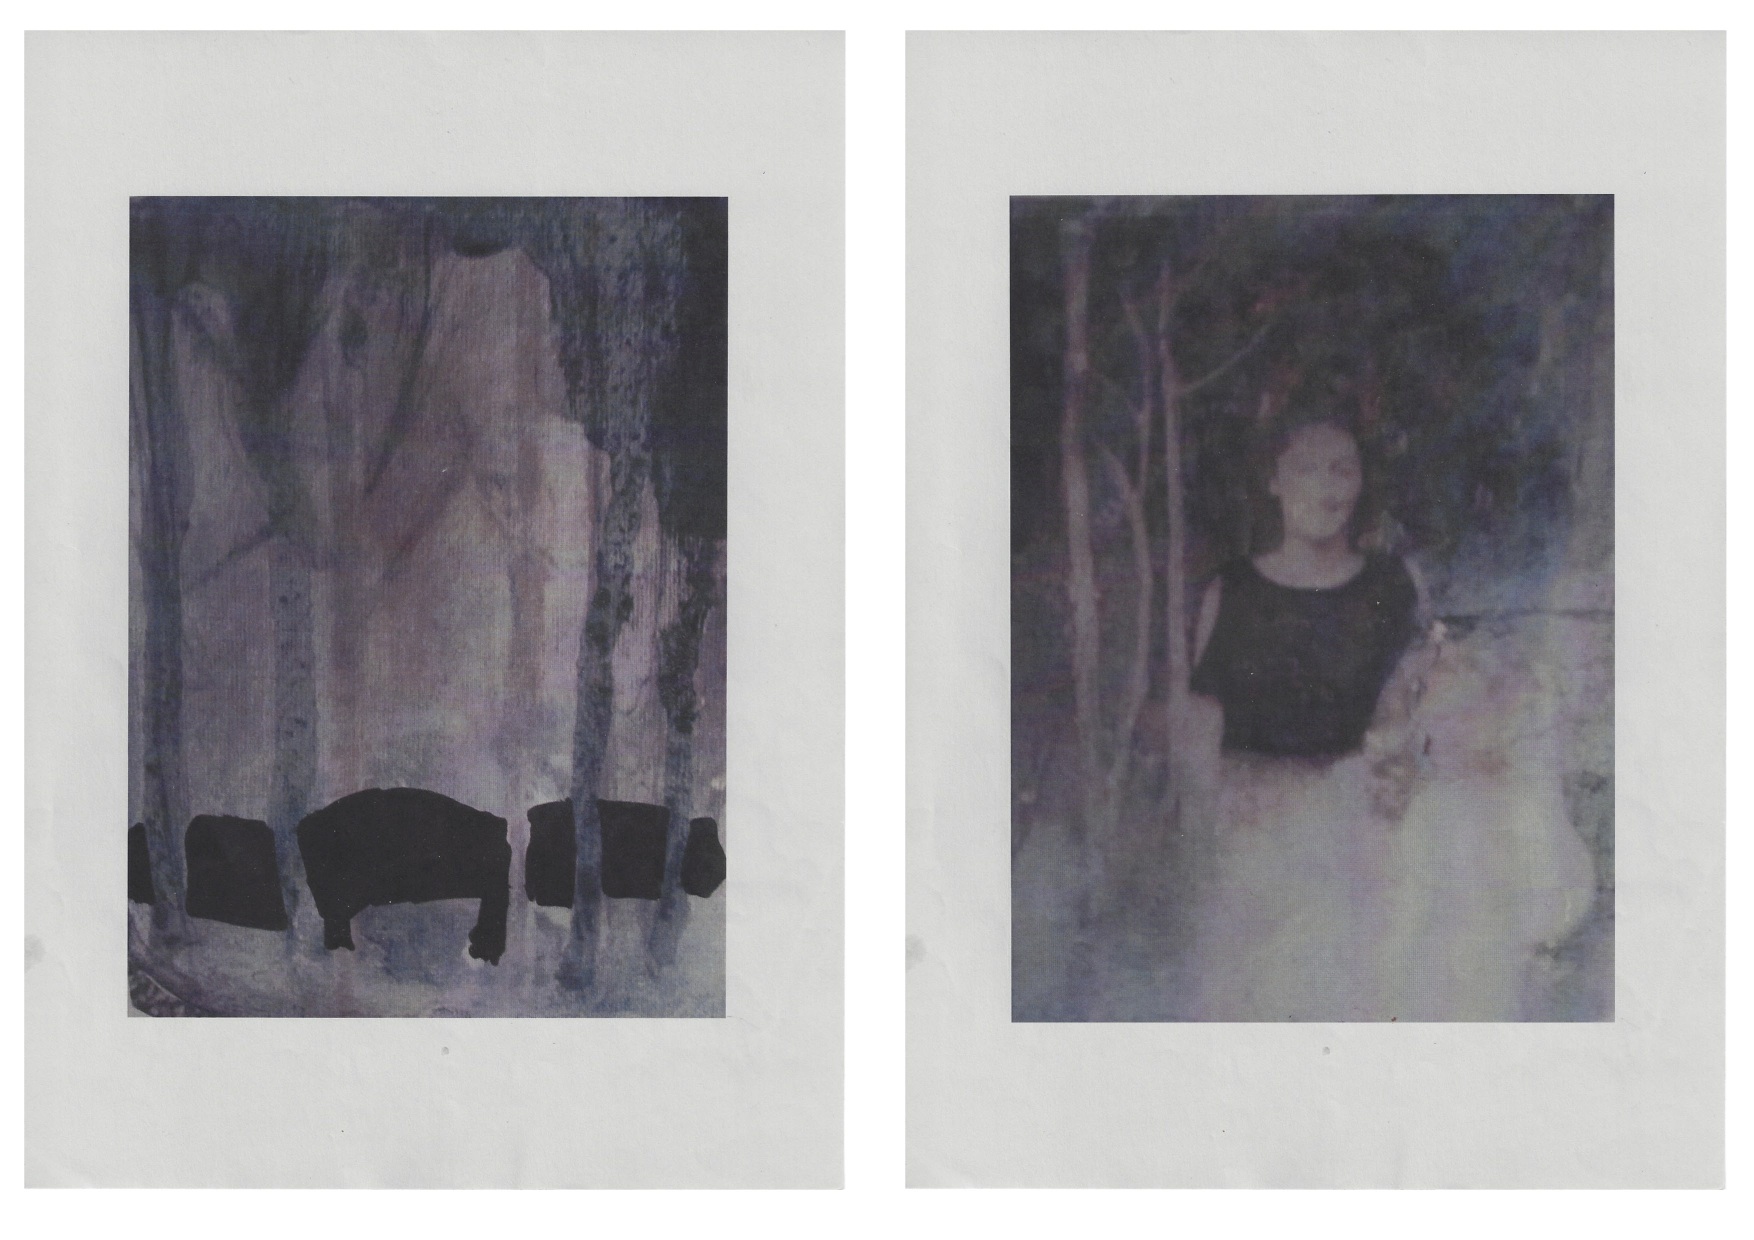  Hunt, 2012, laser print and mixed media on paper, 21 x 14.8 each 